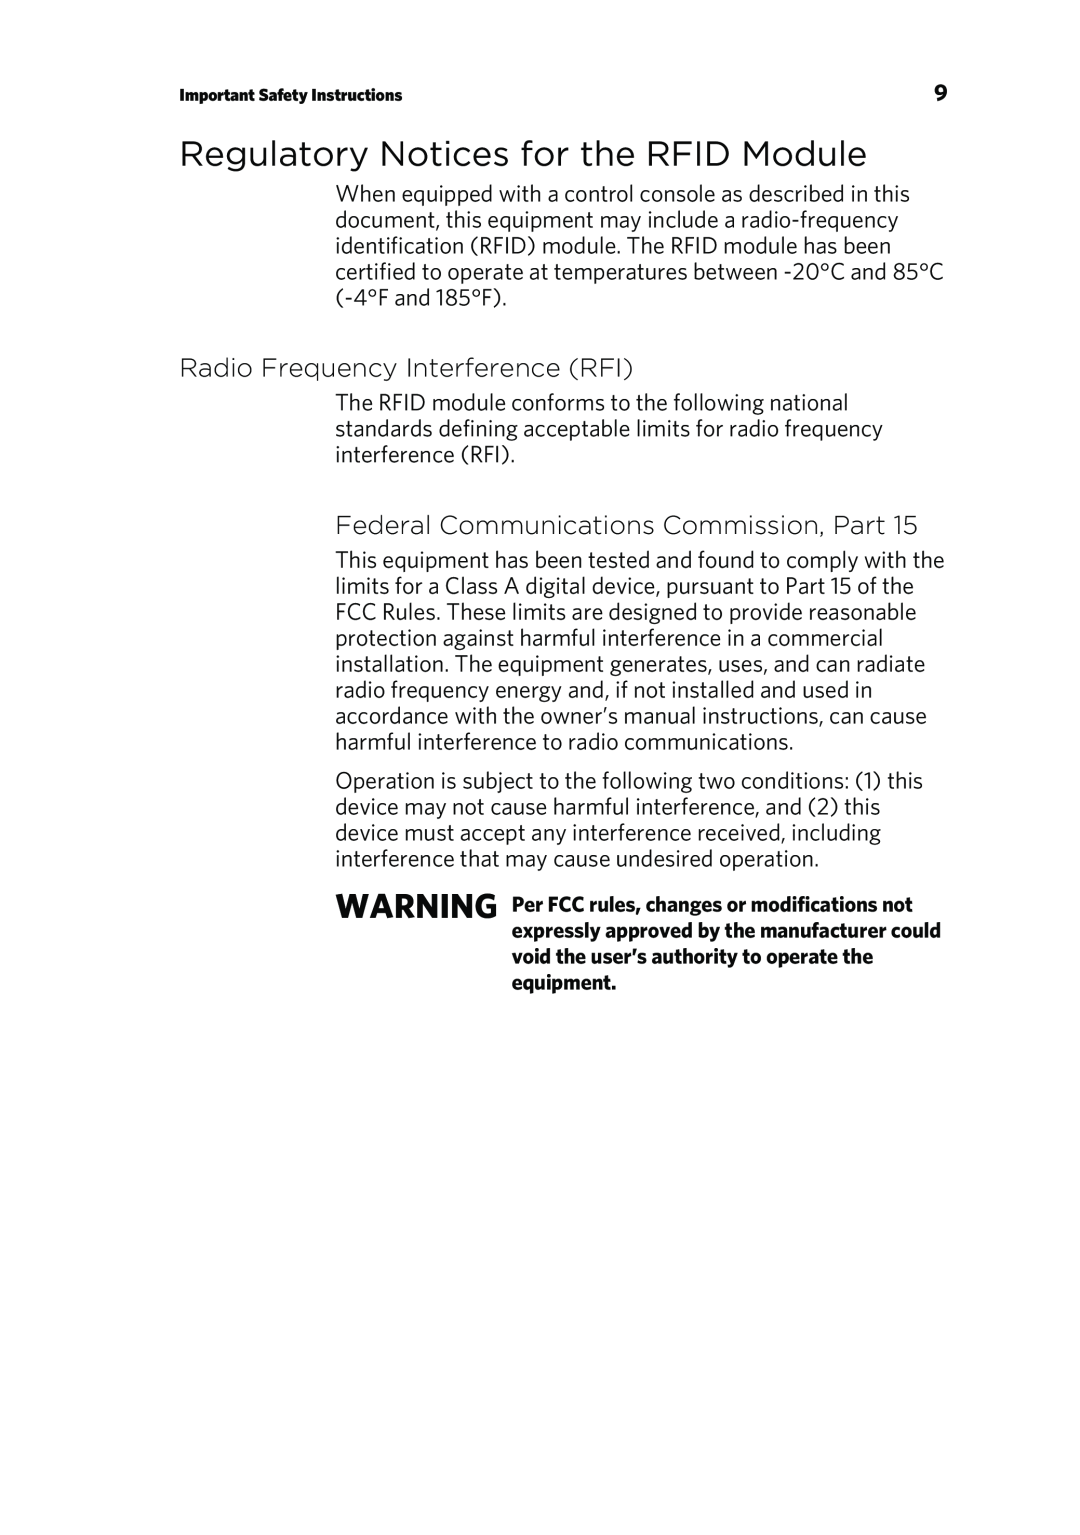 Precor P80 manual Regulatory Notices for the RFID Module, Radio Frequency Interference RFI 